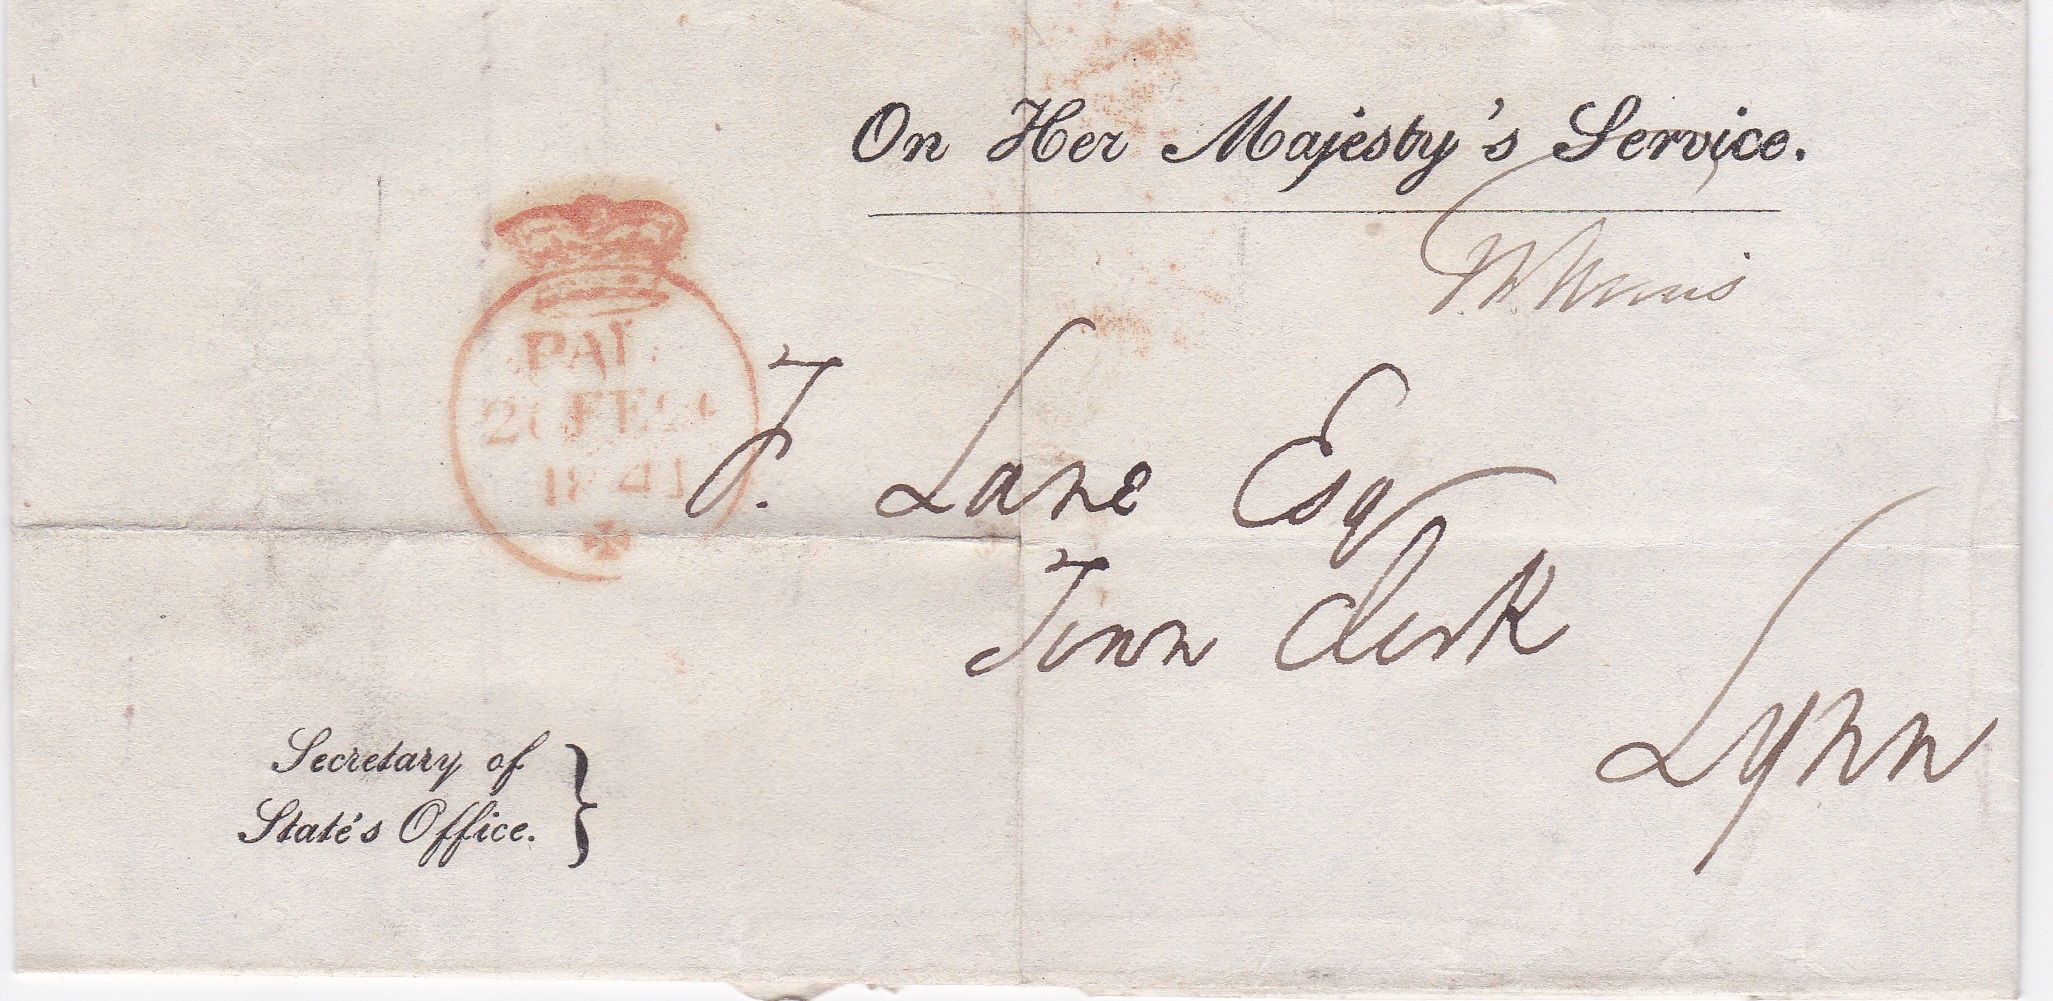 Great Britain 1841 - Pre-stamp folded letter from the Secretary of State's Office to the Town